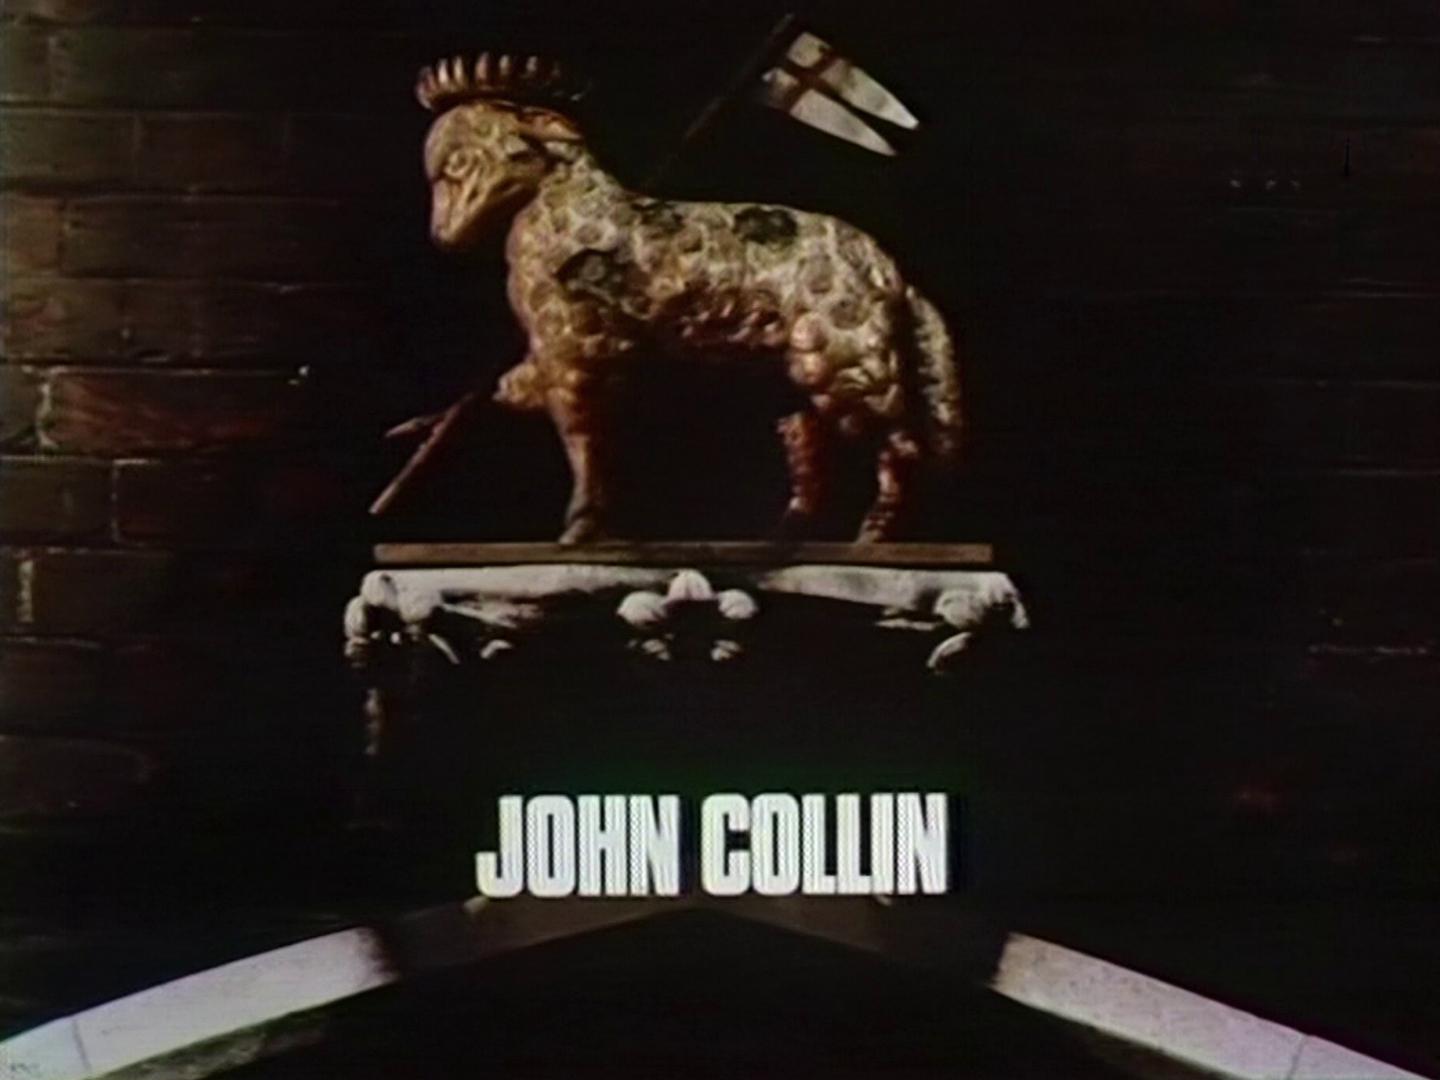 Main title from the ‘By Order of the Magistrates’ episode of Justice (1971-74) (4). John Collin